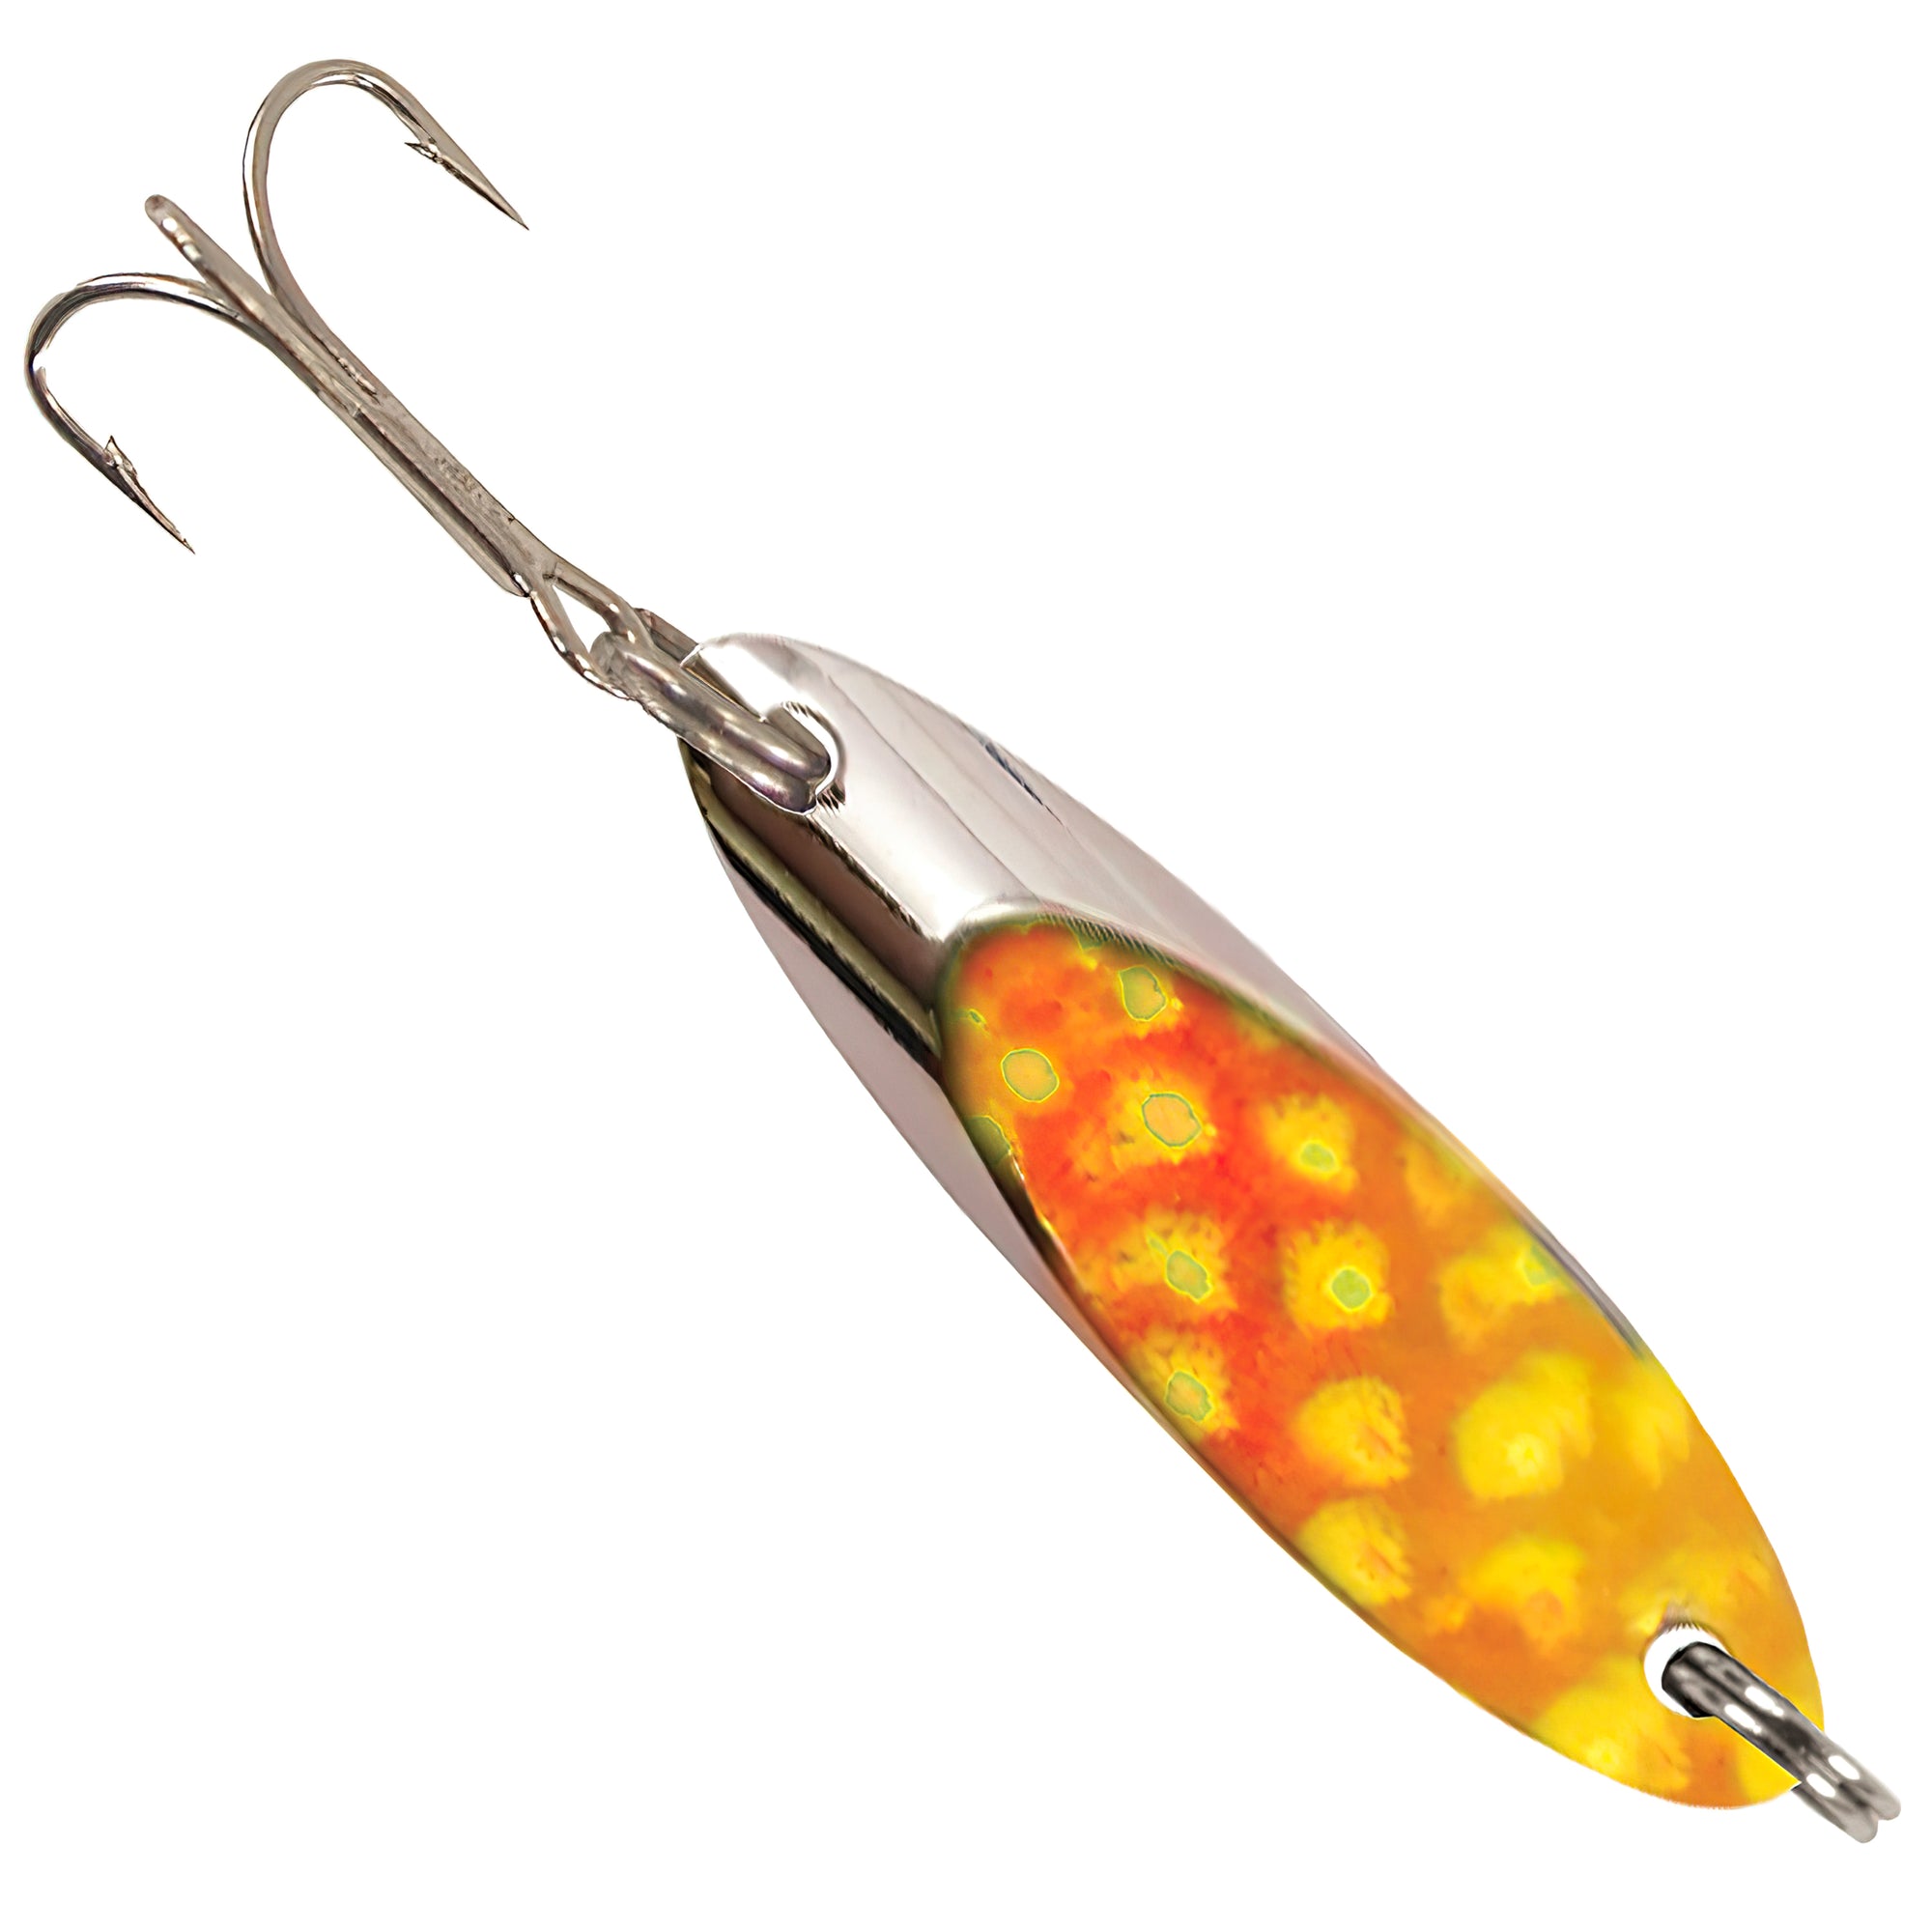 Kastmaster Trout Lure Review